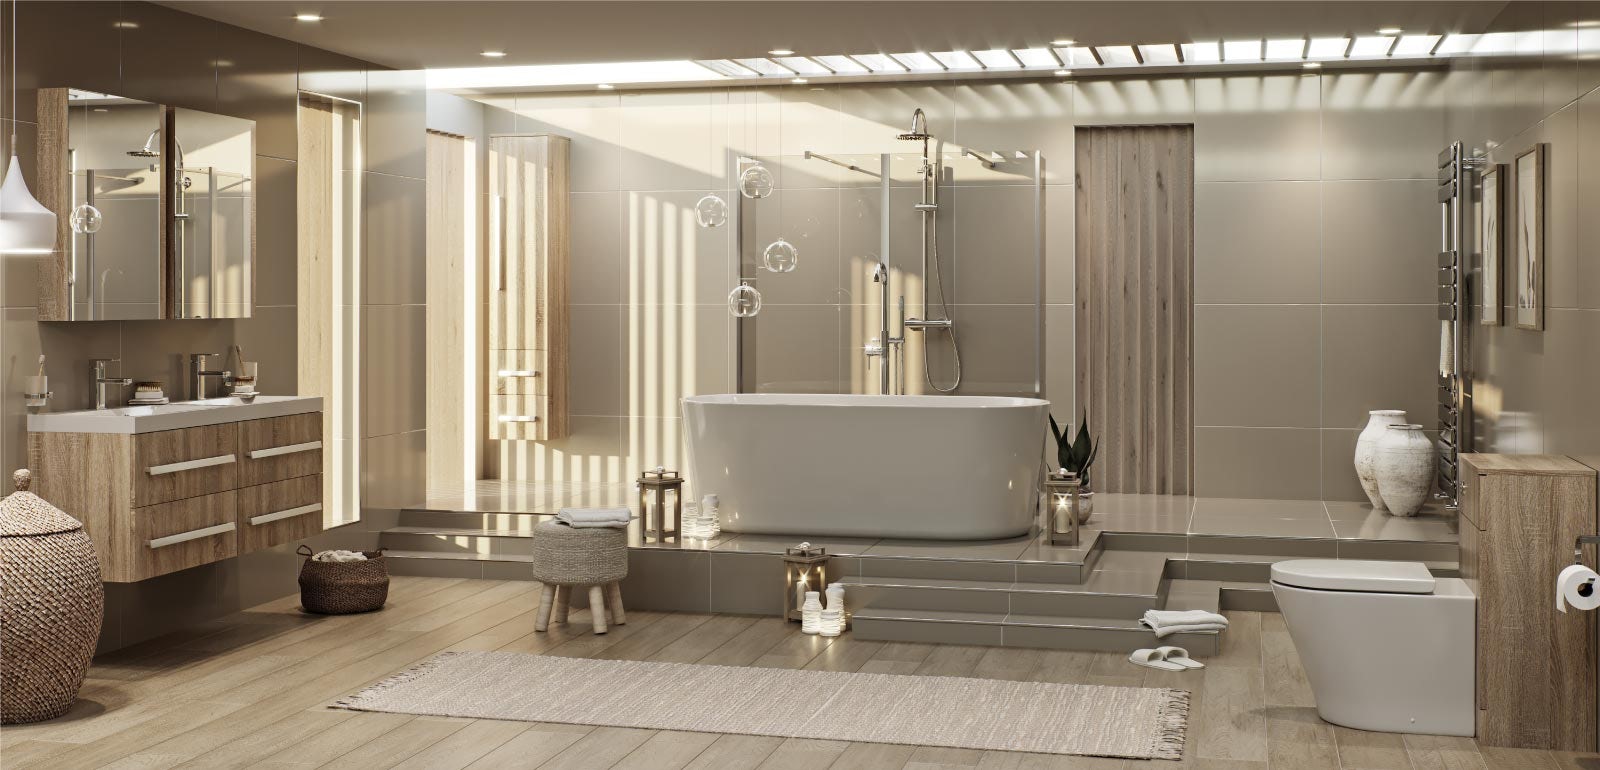 Wellness At Home: Incorporating Health-Enhancing Features Into Bathroom Design For Complete Relaxation